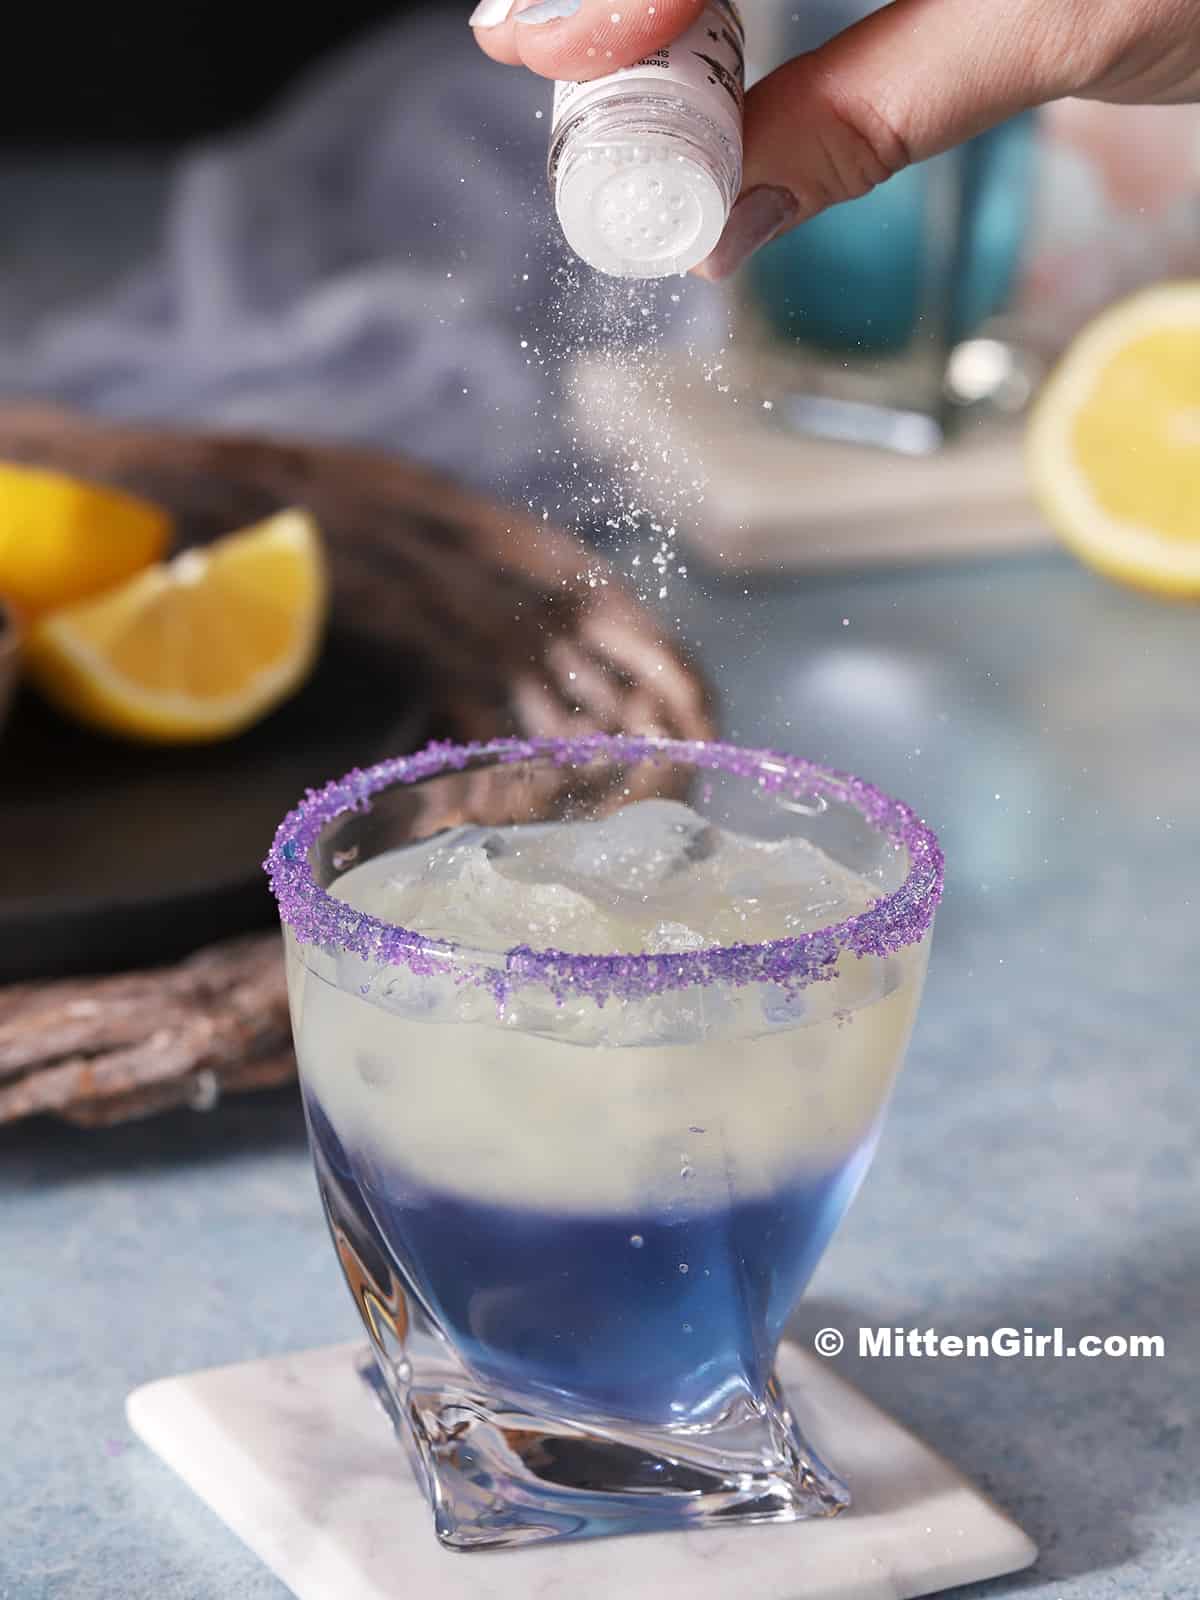 Edible glitter being dusted on a finished unicorn drink.